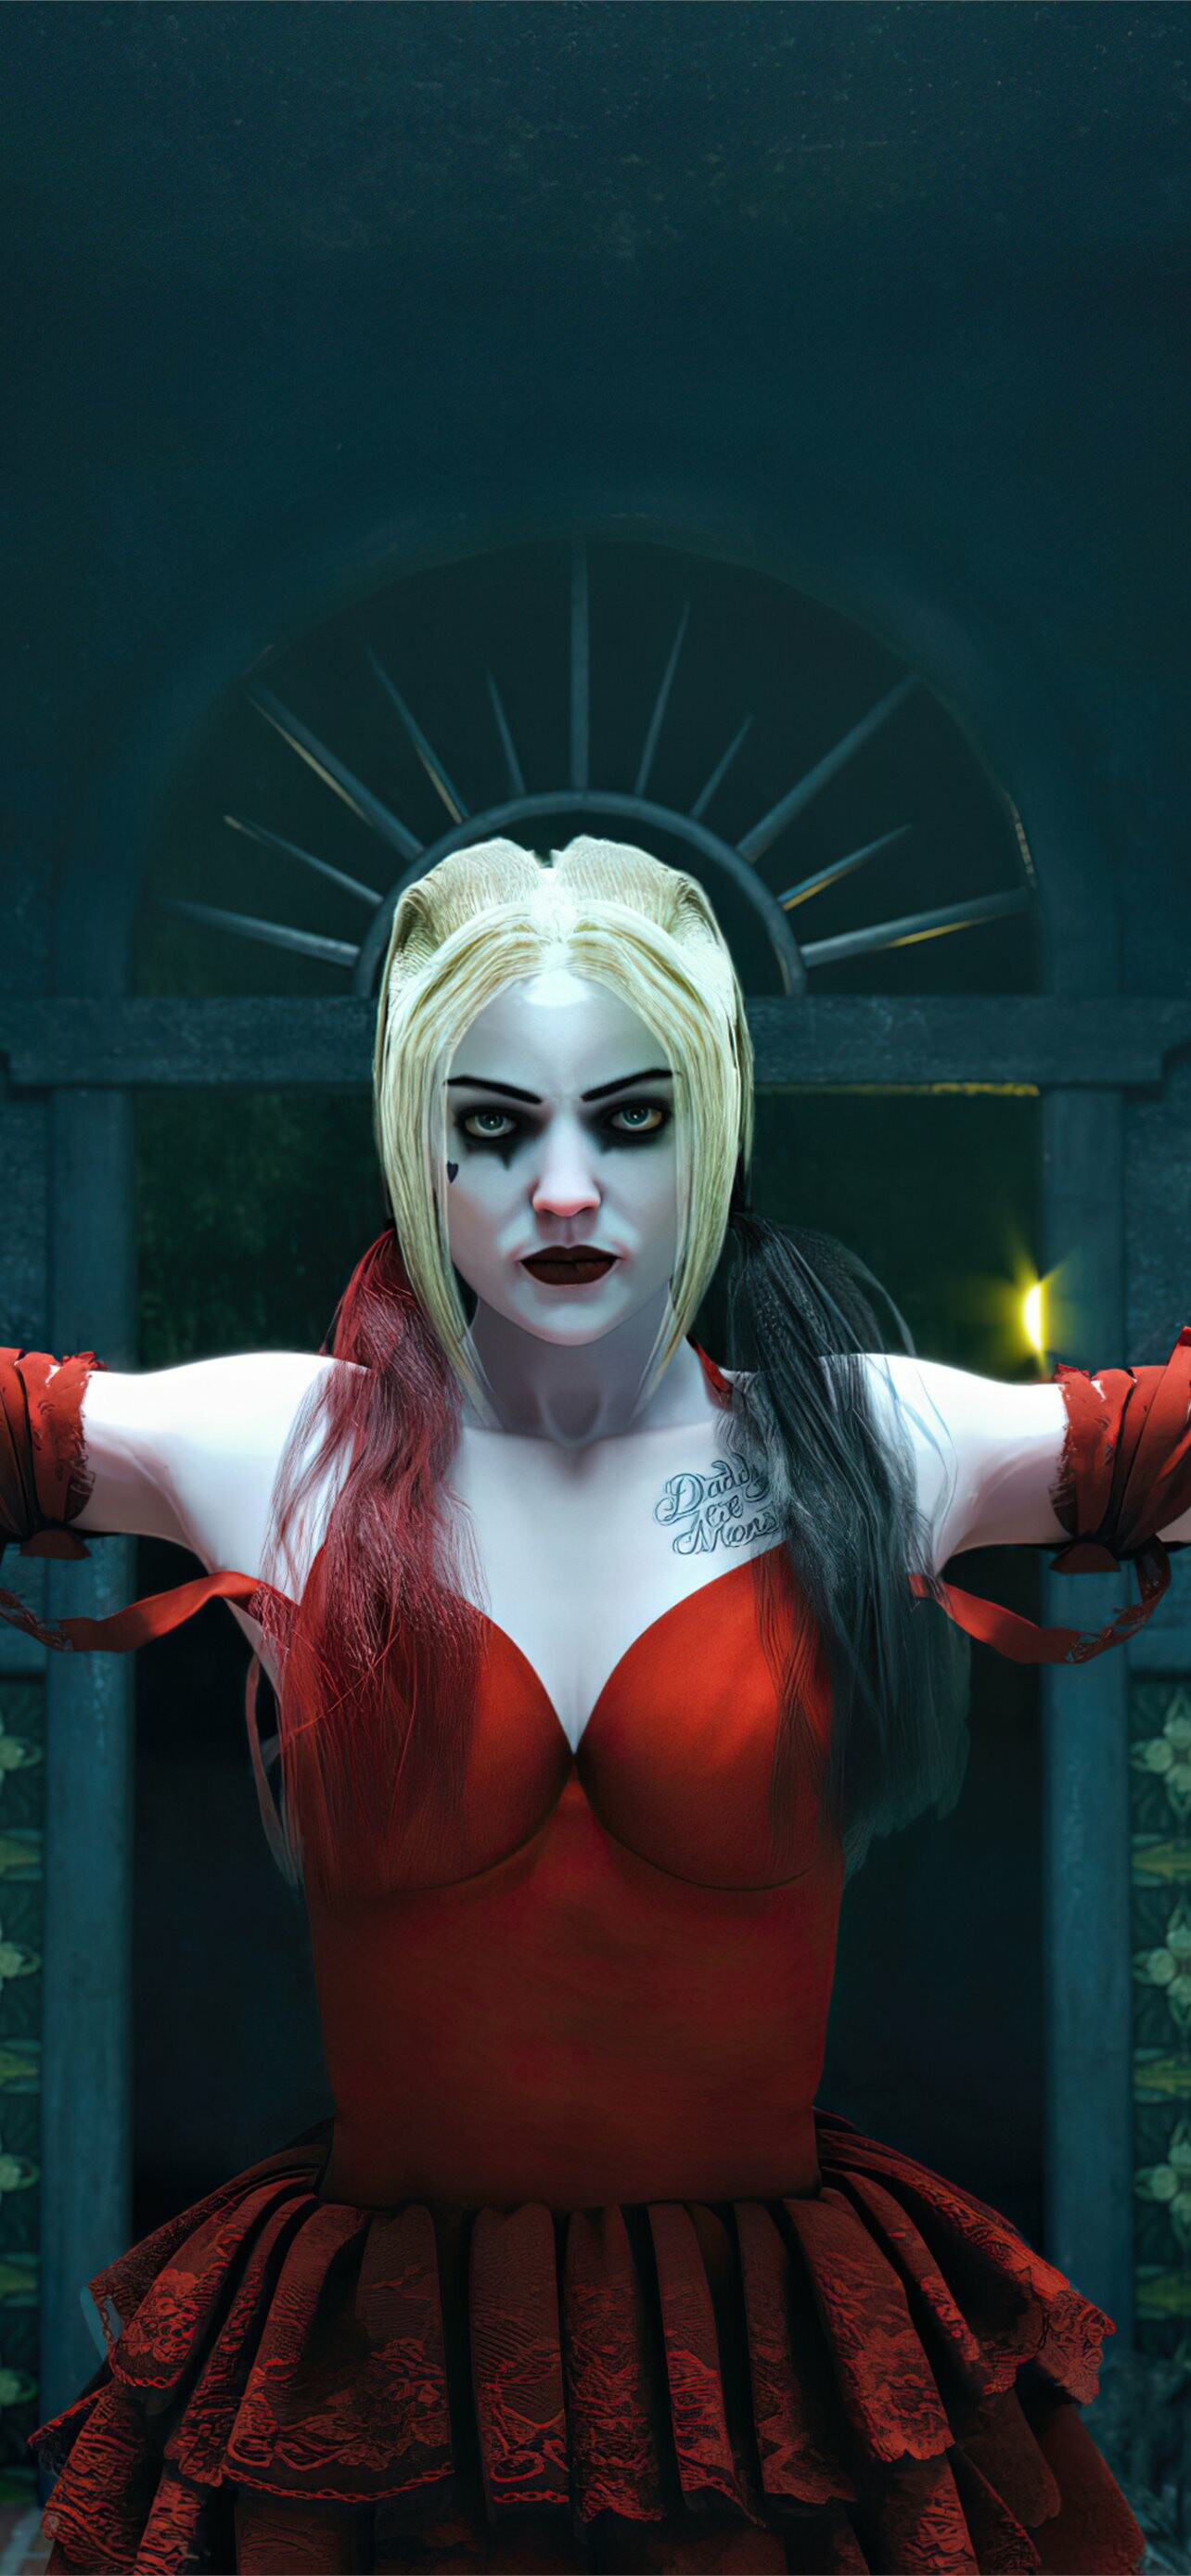 Suicide Squad: Robbie's portrayal of Harley Quinn has received widespread critical acclaim. 1290x2780 HD Background.